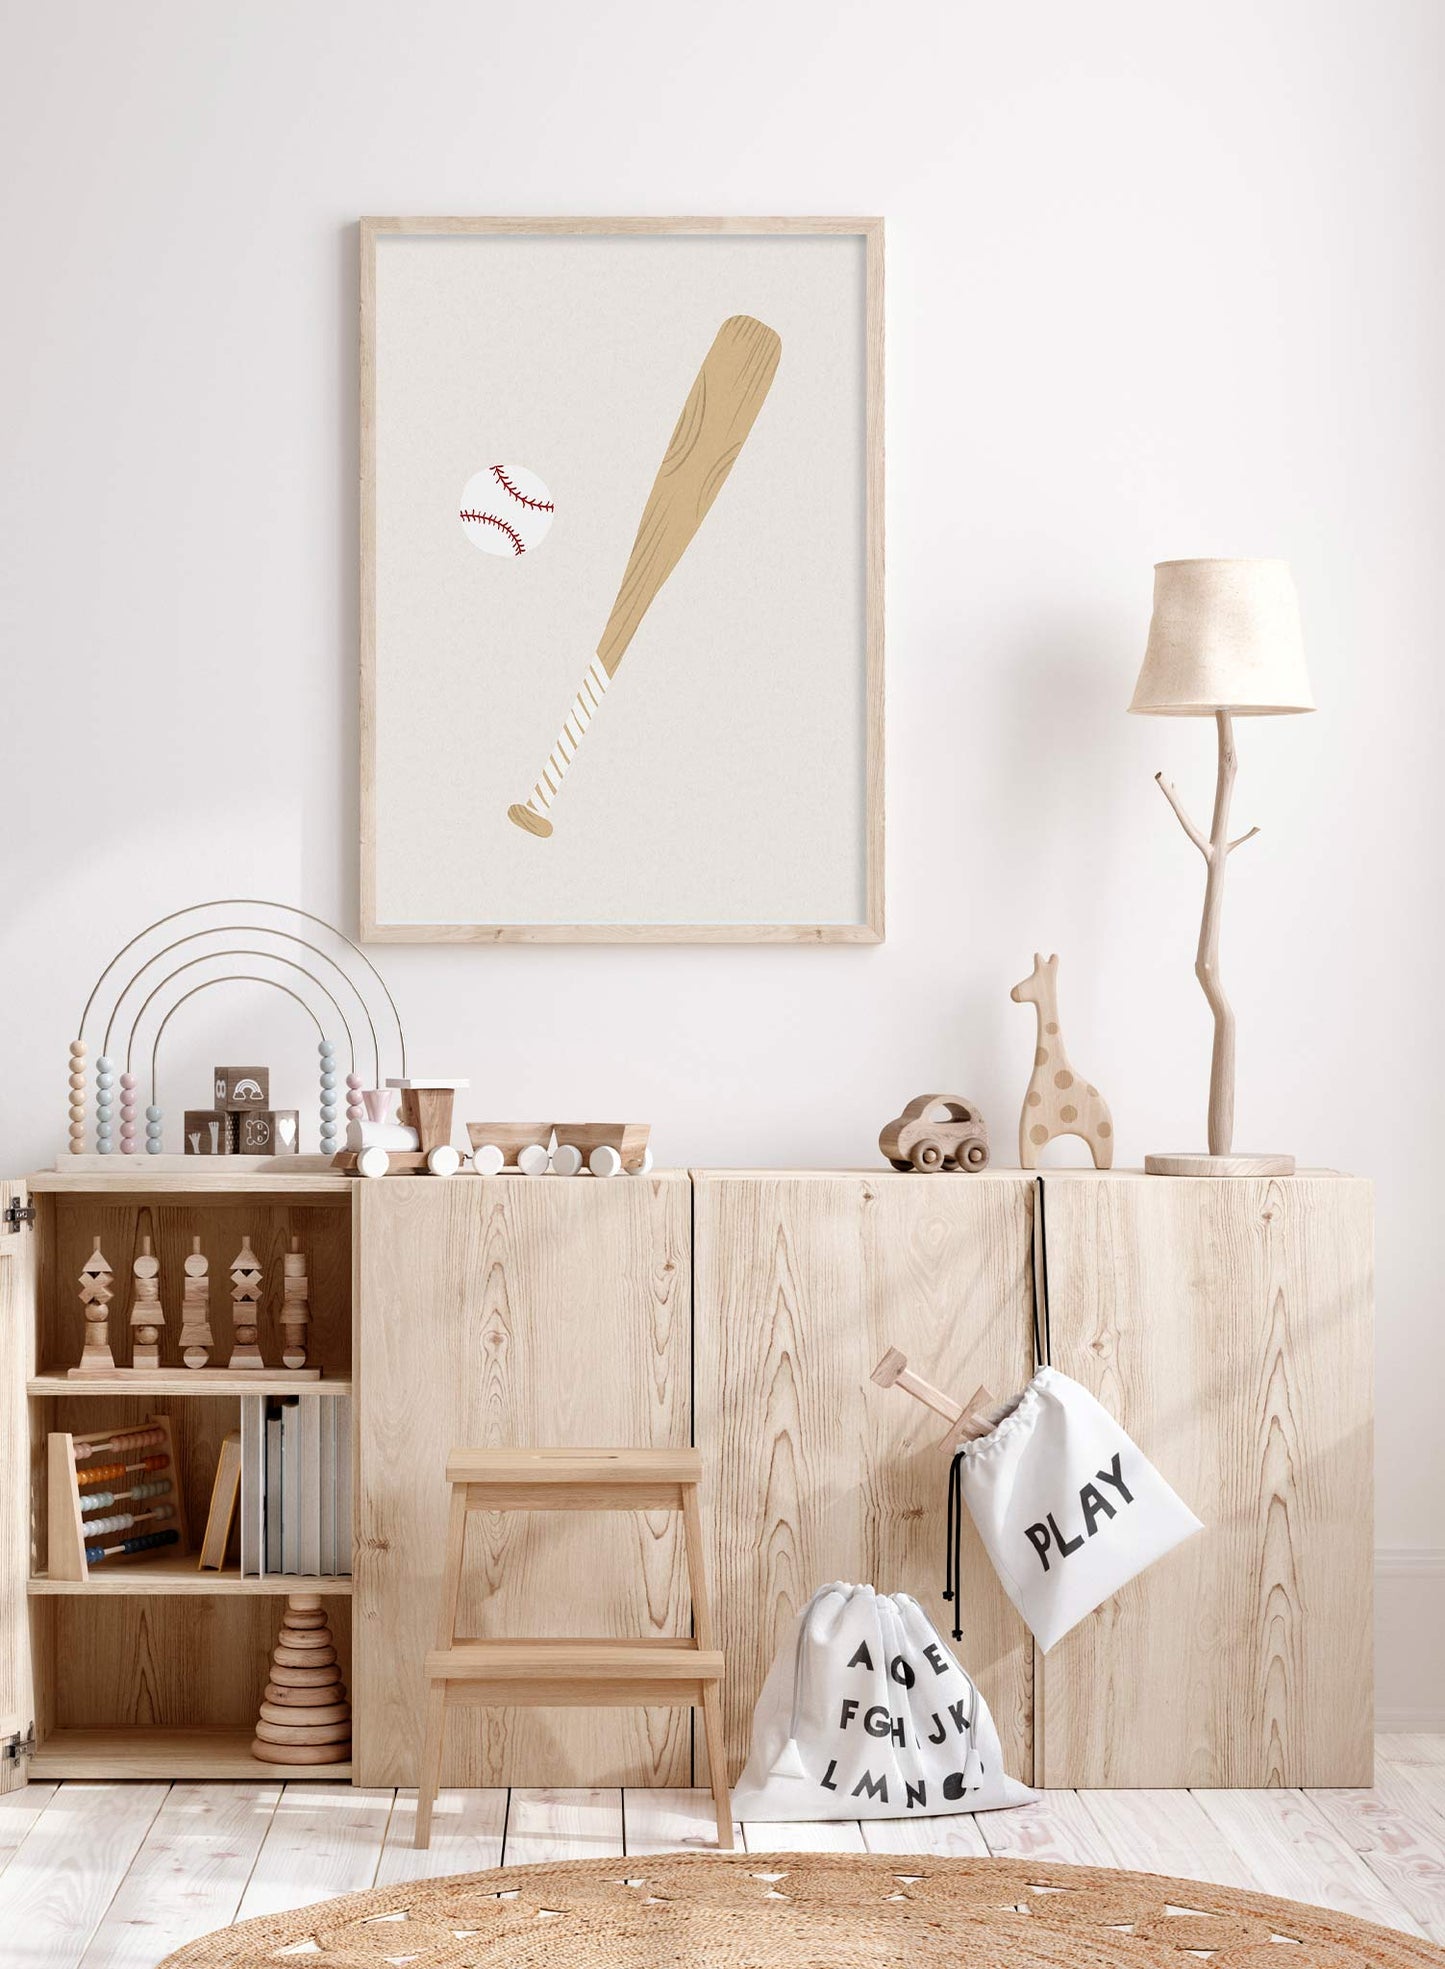 Home Run is a minimalist illustration by Opposite Wall of a baseball bat and its ball ready to hit a home run.